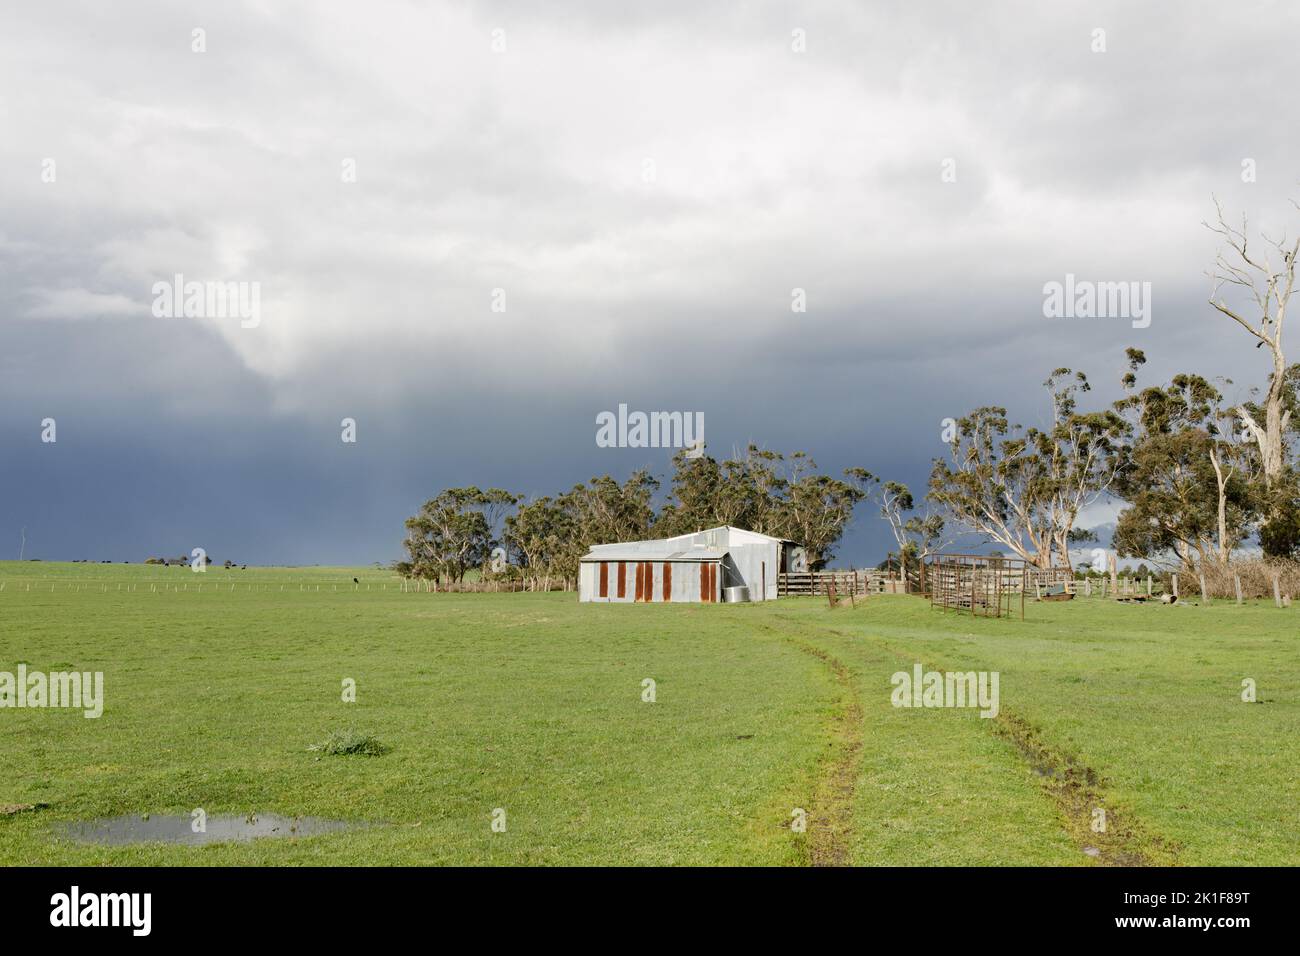 A corrugated iron shed on an Australian farm with green grass and a moody sky in the back ground, there are tyre tracks headed toward the shed. Stock Photo